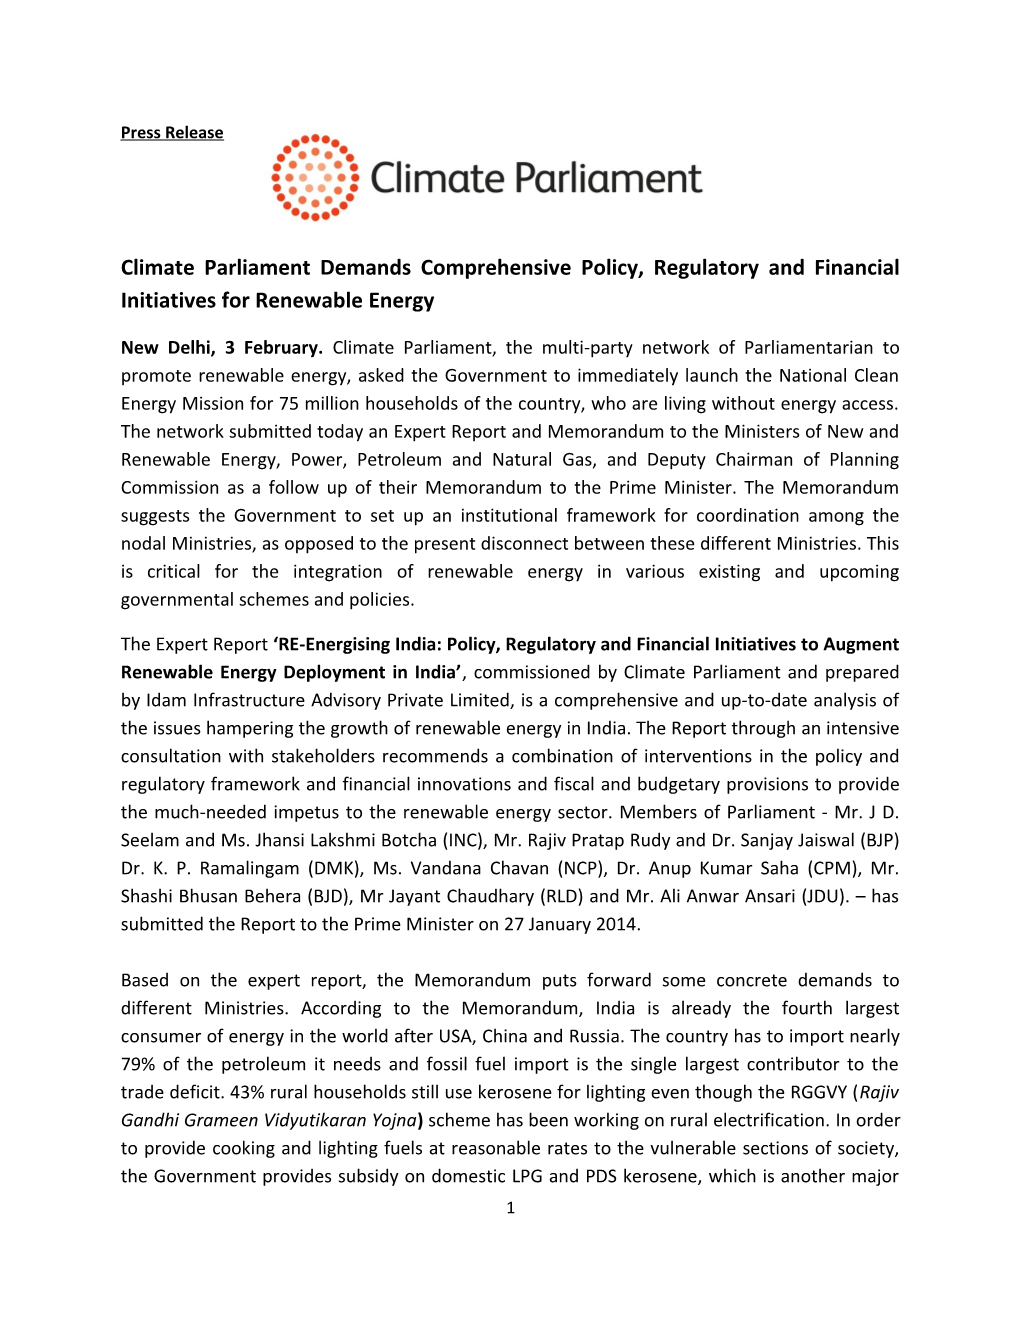 Climate Parliament Demands Comprehensive Policy, Regulatory and Financial Initiatives